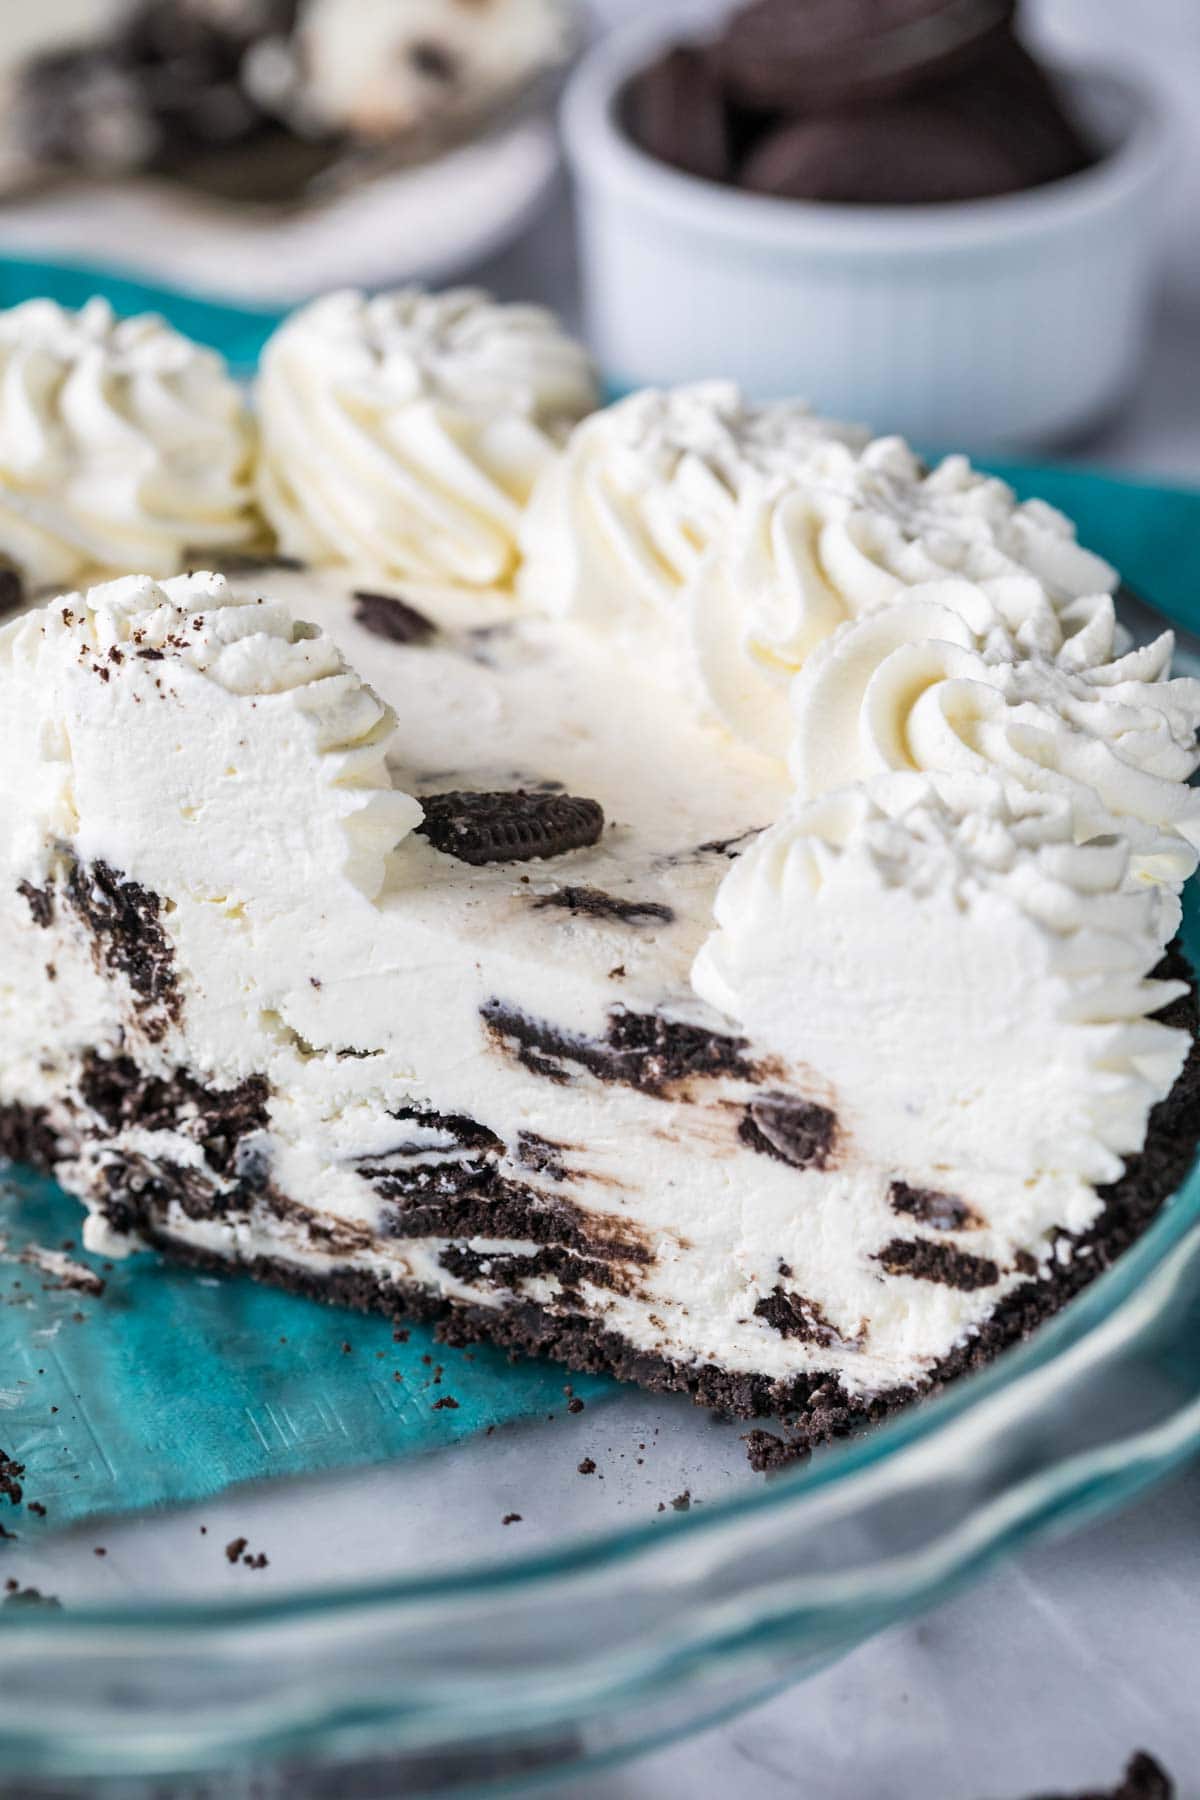 Cross section of pie made with an Oreo crust, creamy Oreo cookie filling, and whipped cream topping.